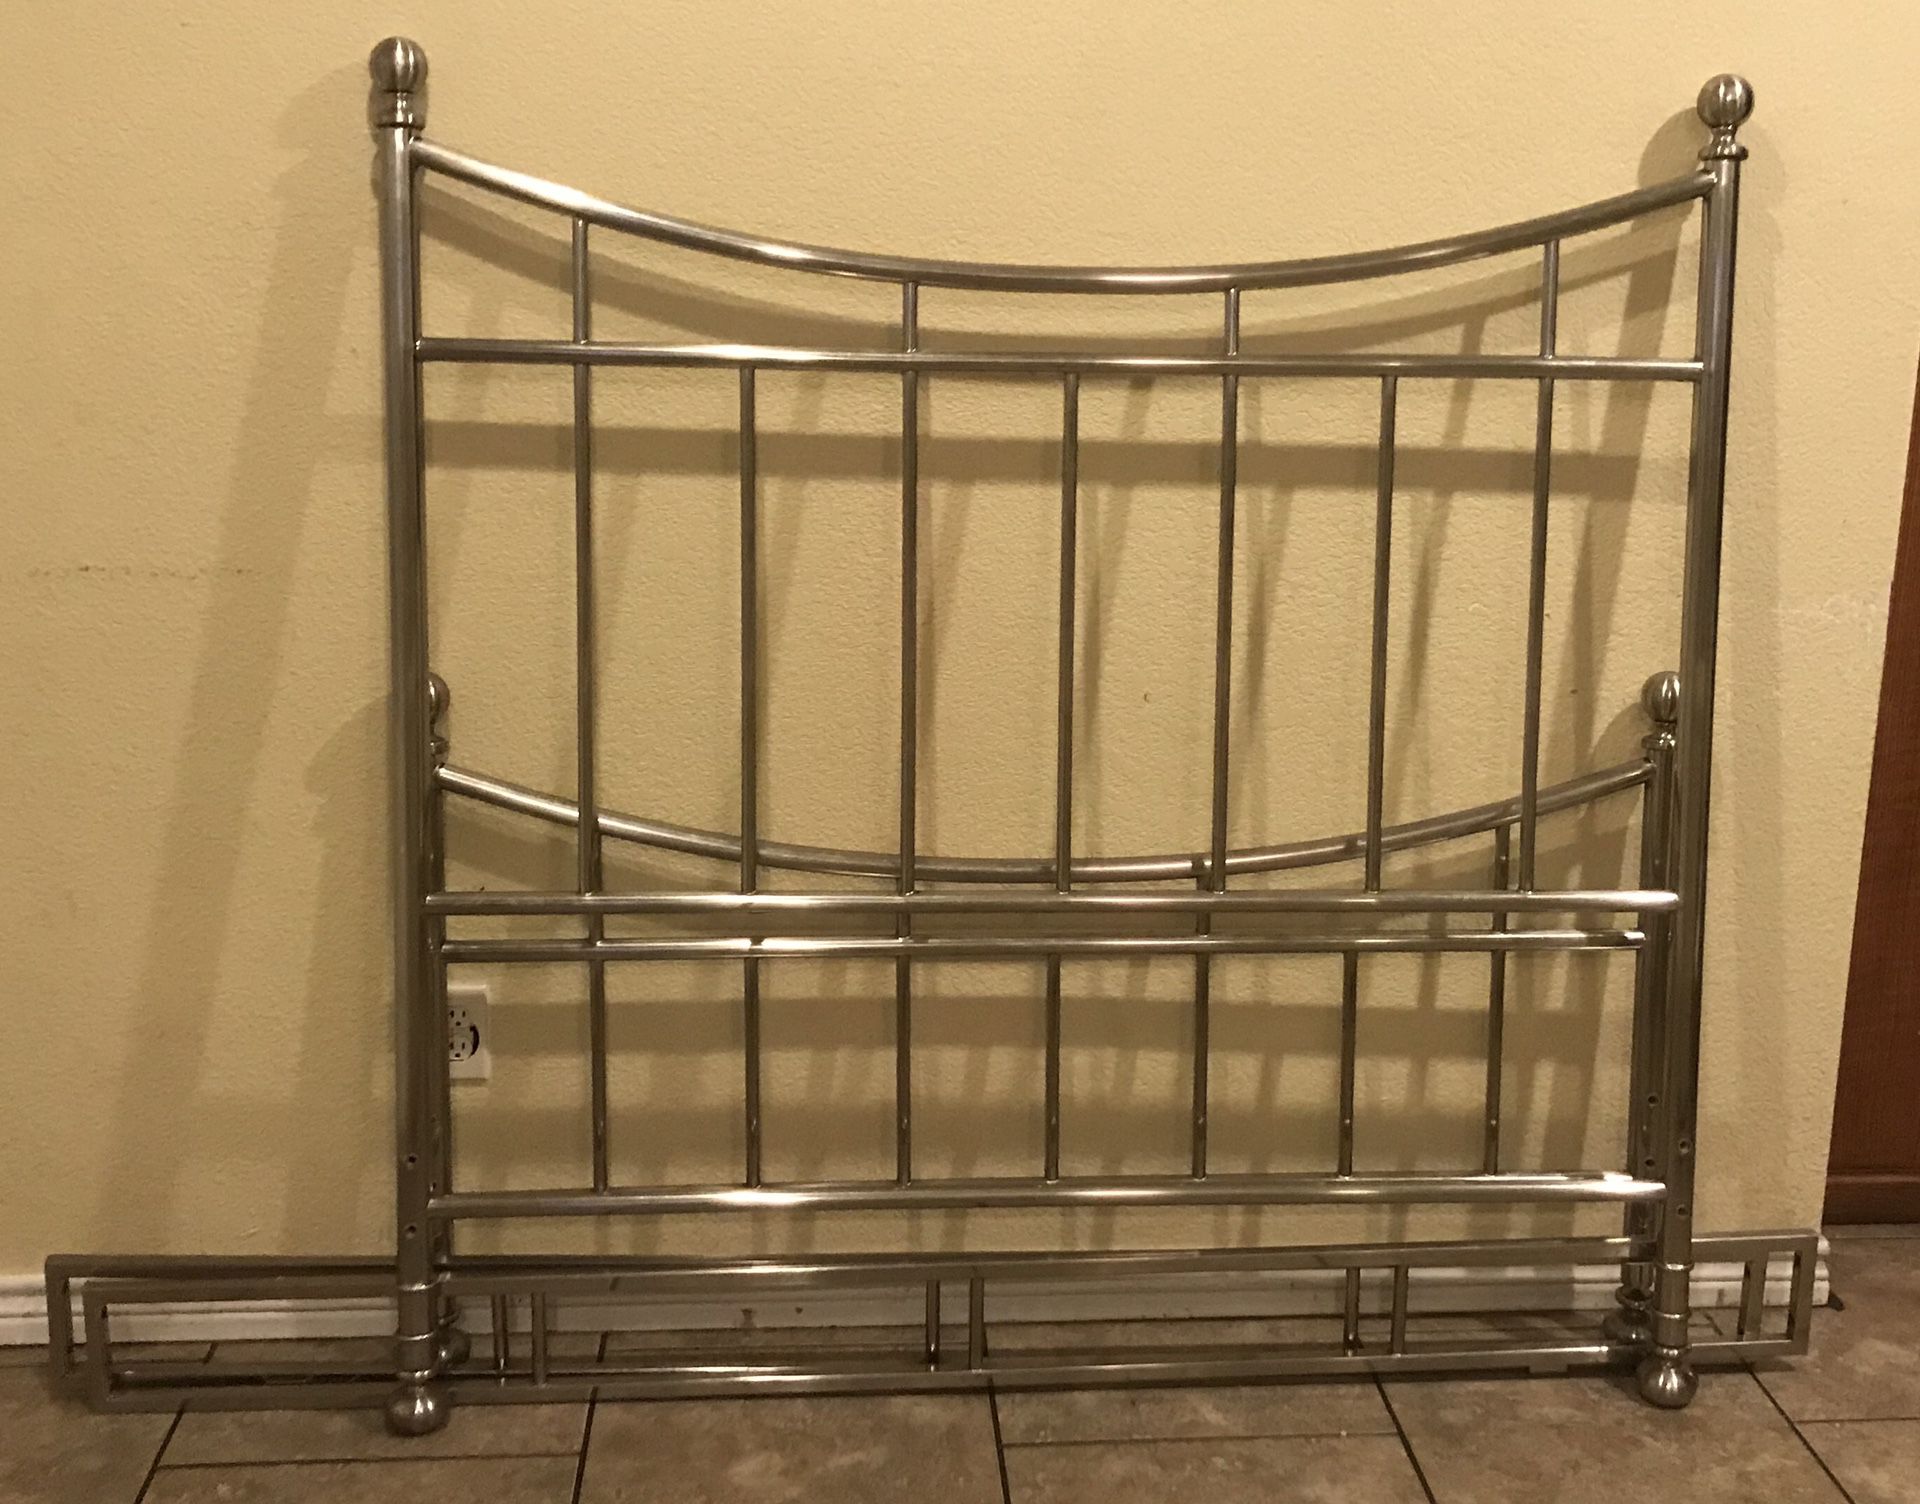 REDUCED FOR QUICK SALE- Queen Size Bed (Frame and Rails)- pick up only - No delivery